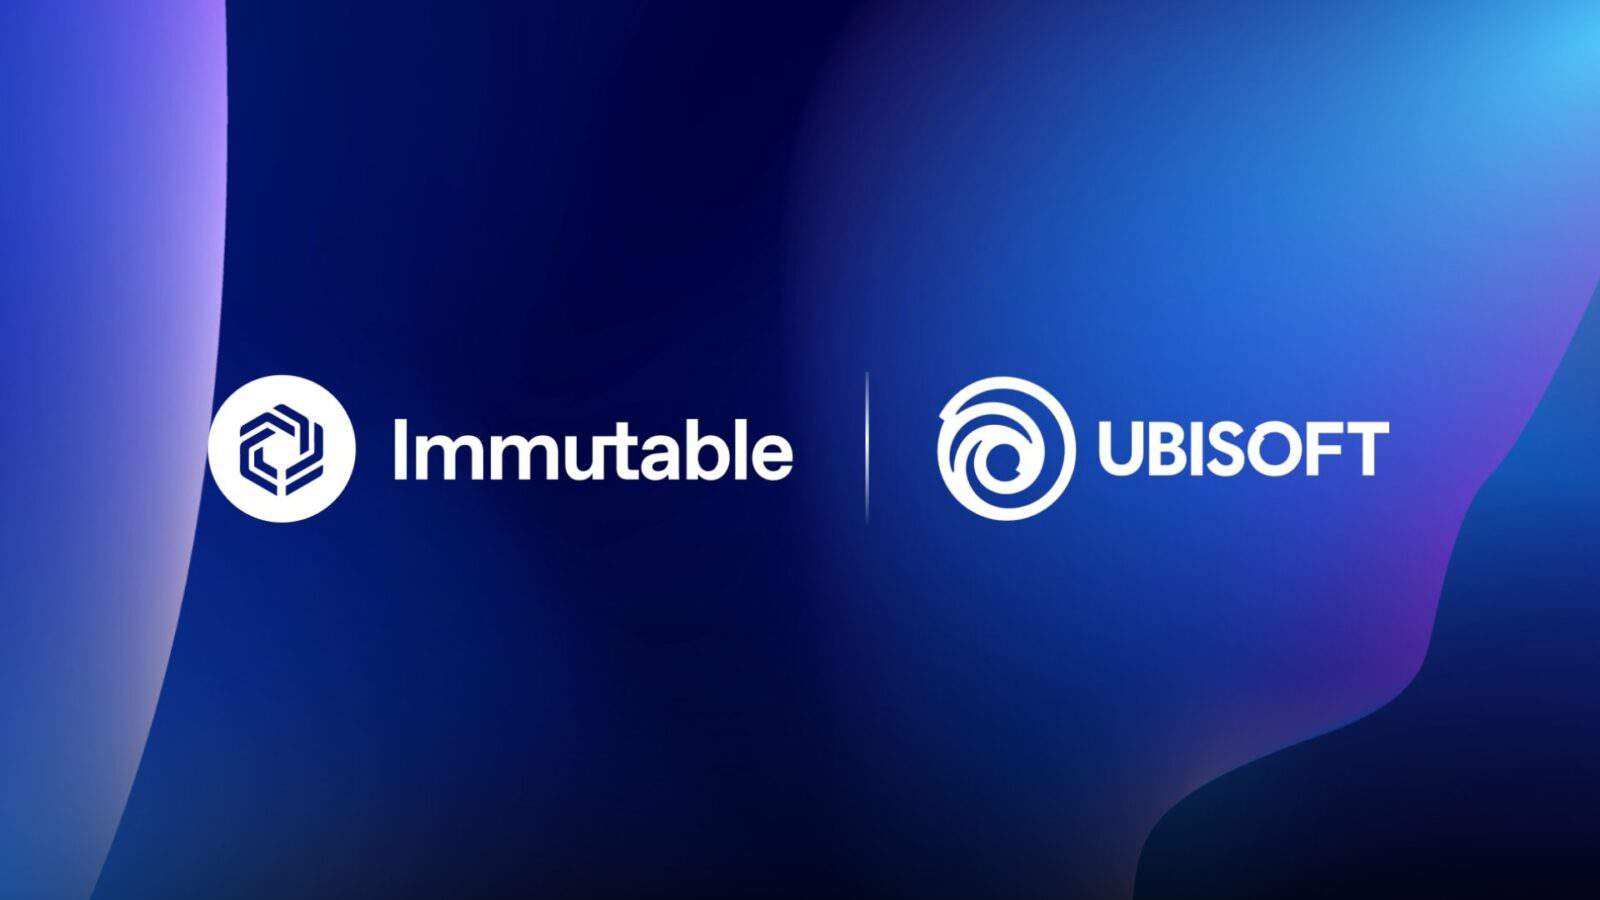 Immutable and Ubisoft Unite to Create a New Web3 Gaming Experience